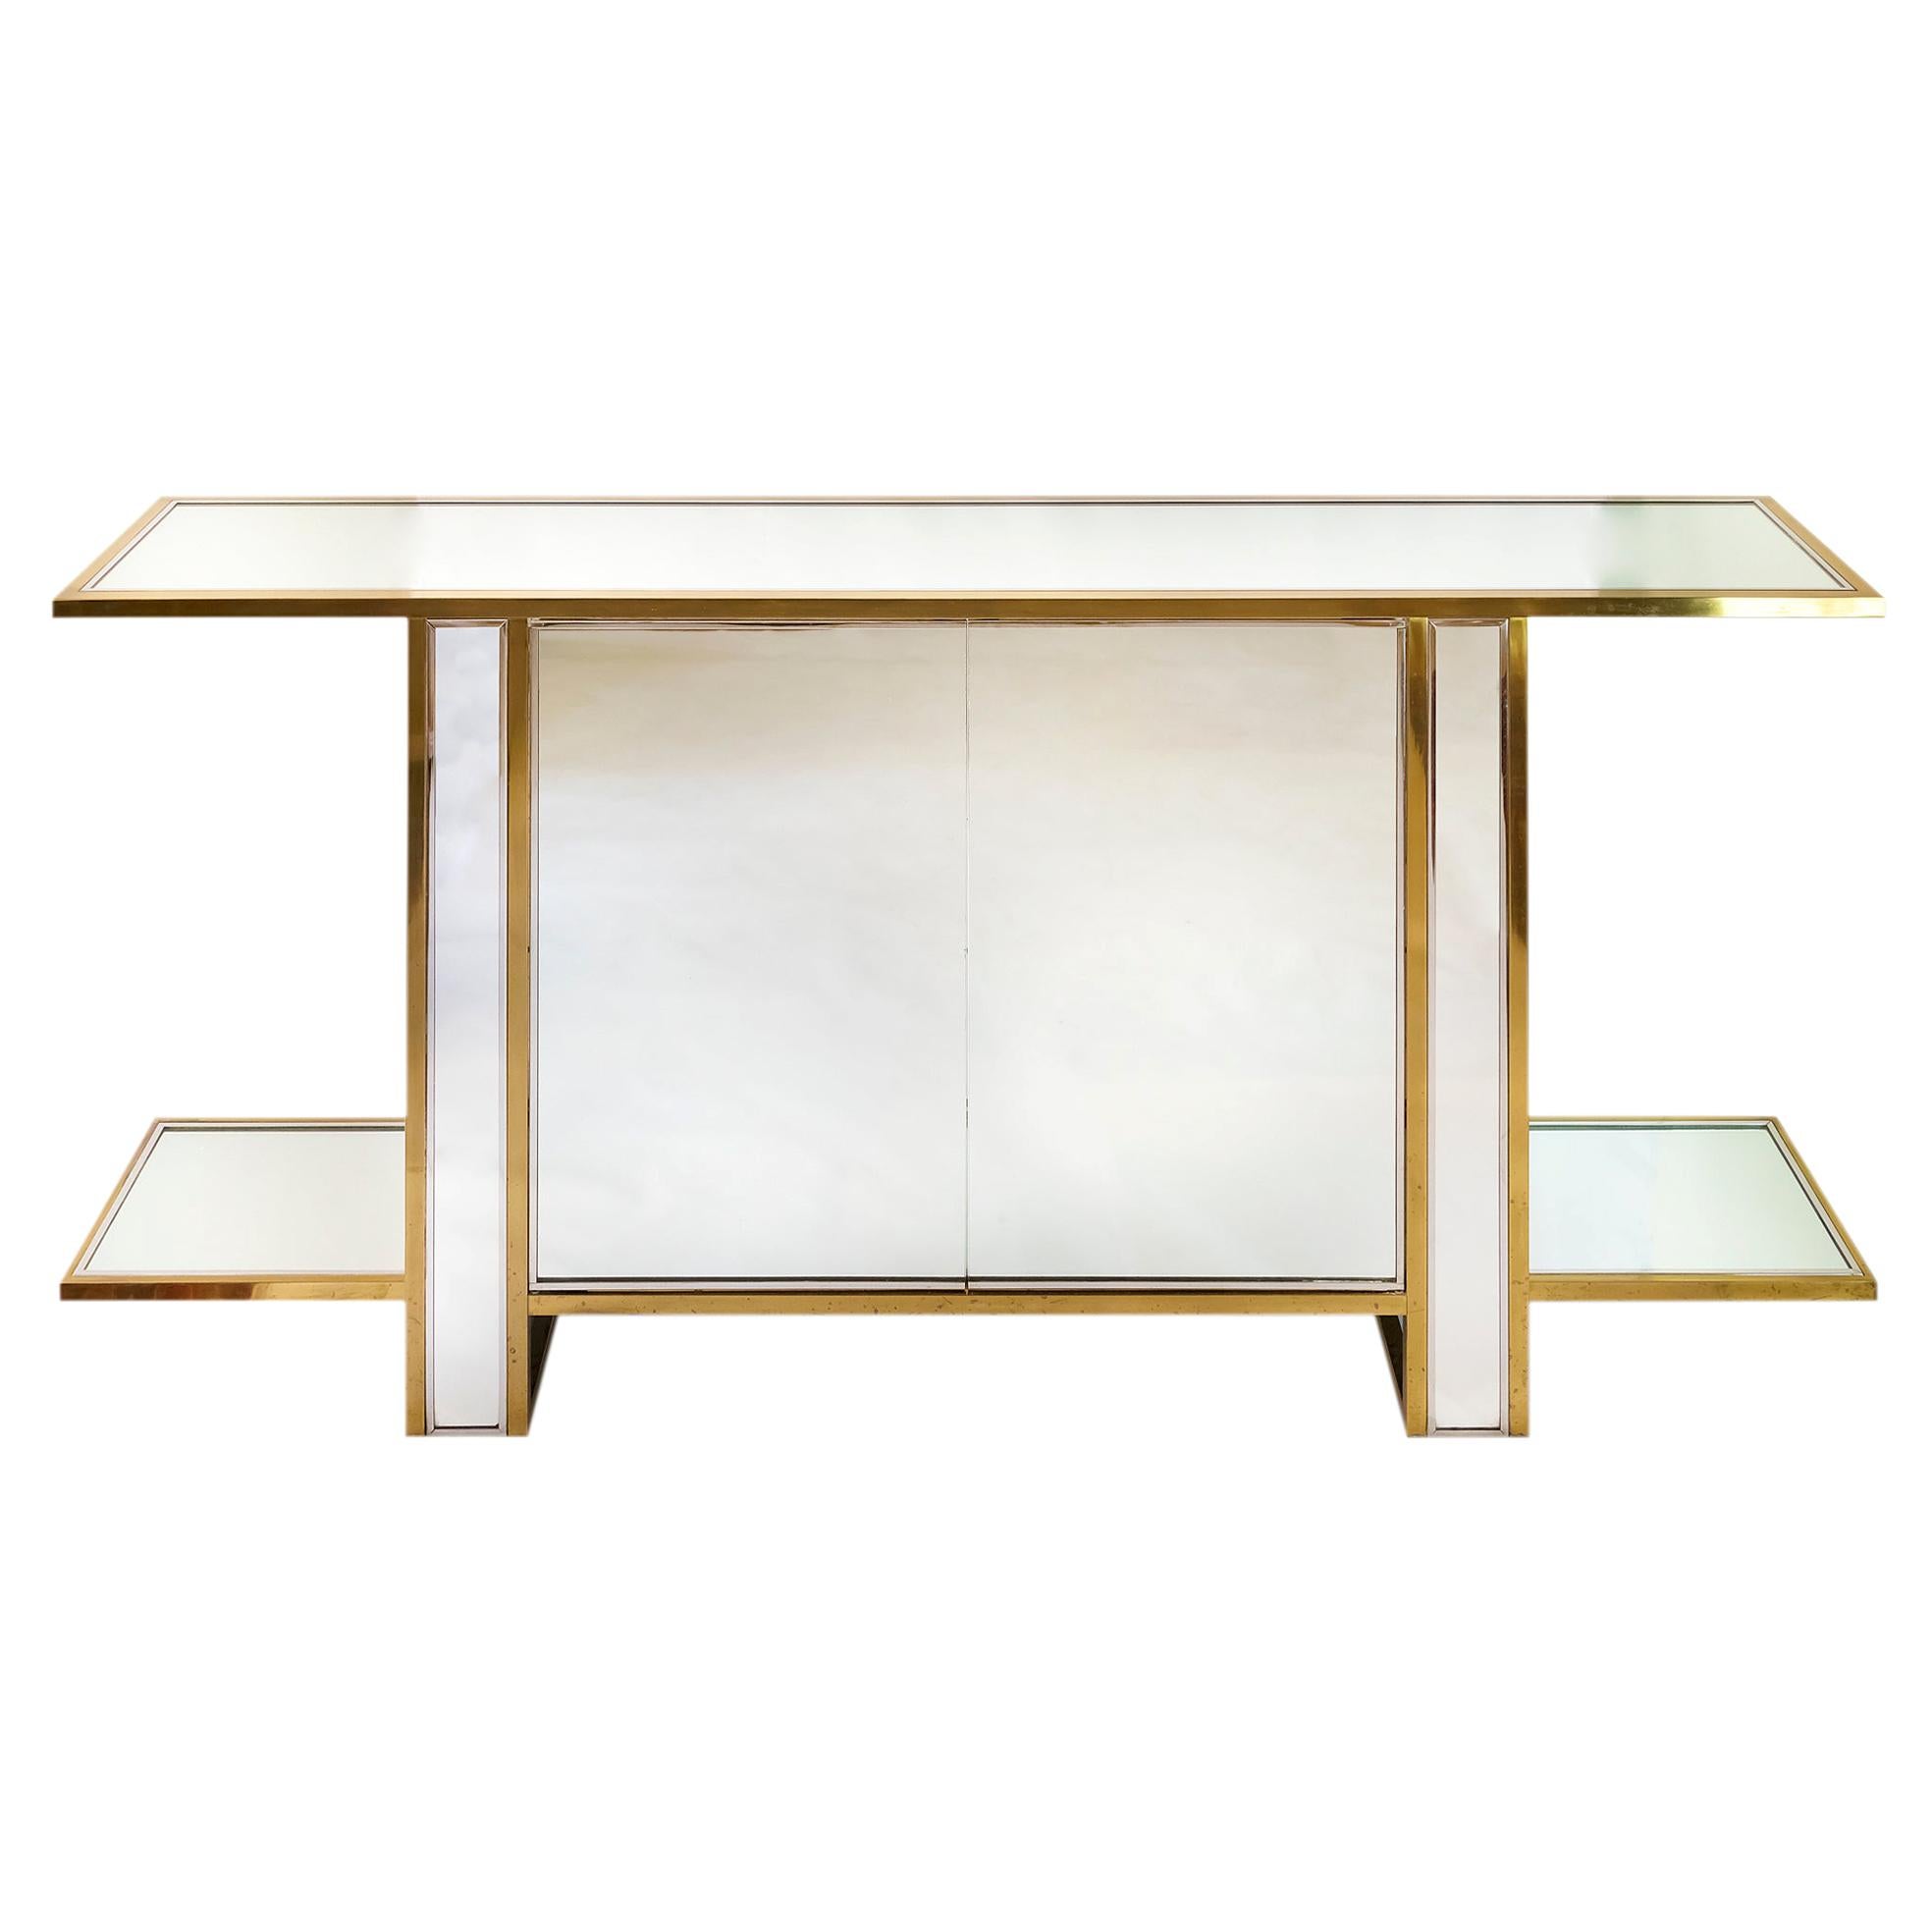 Two Sided Mirrored Brass, Chrome and Glass Console Vitrine